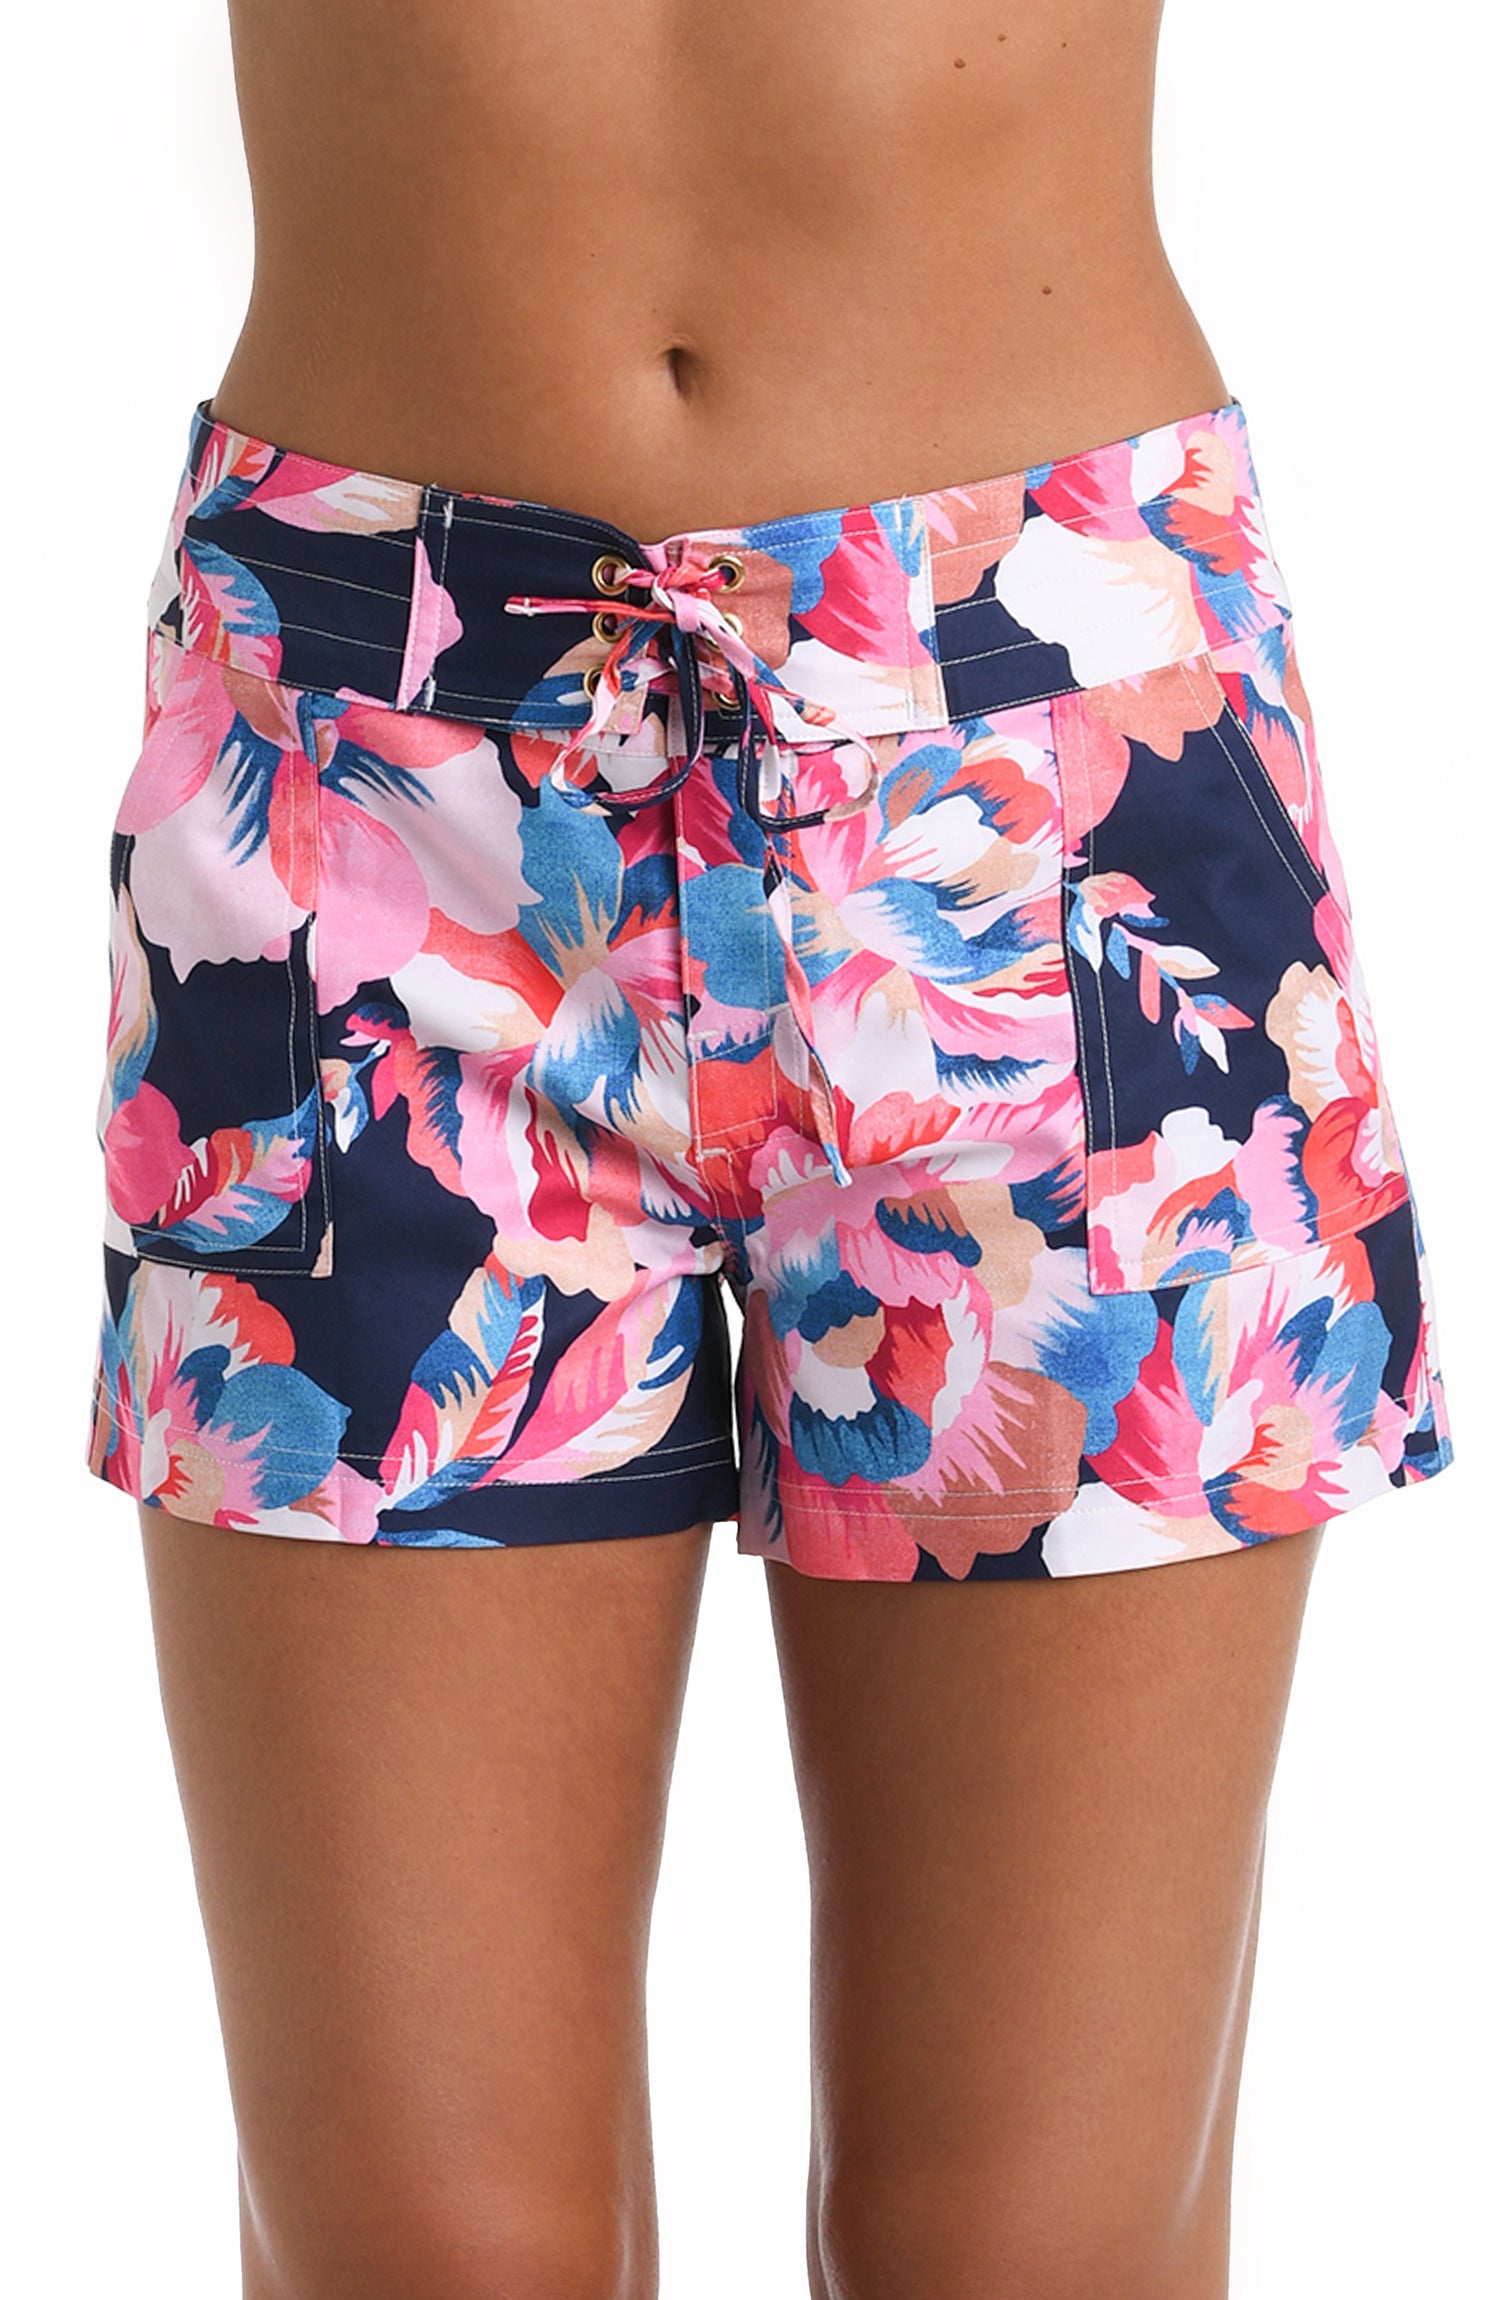 Model is wearing a floral beach short from the Denim Bouquet collection.